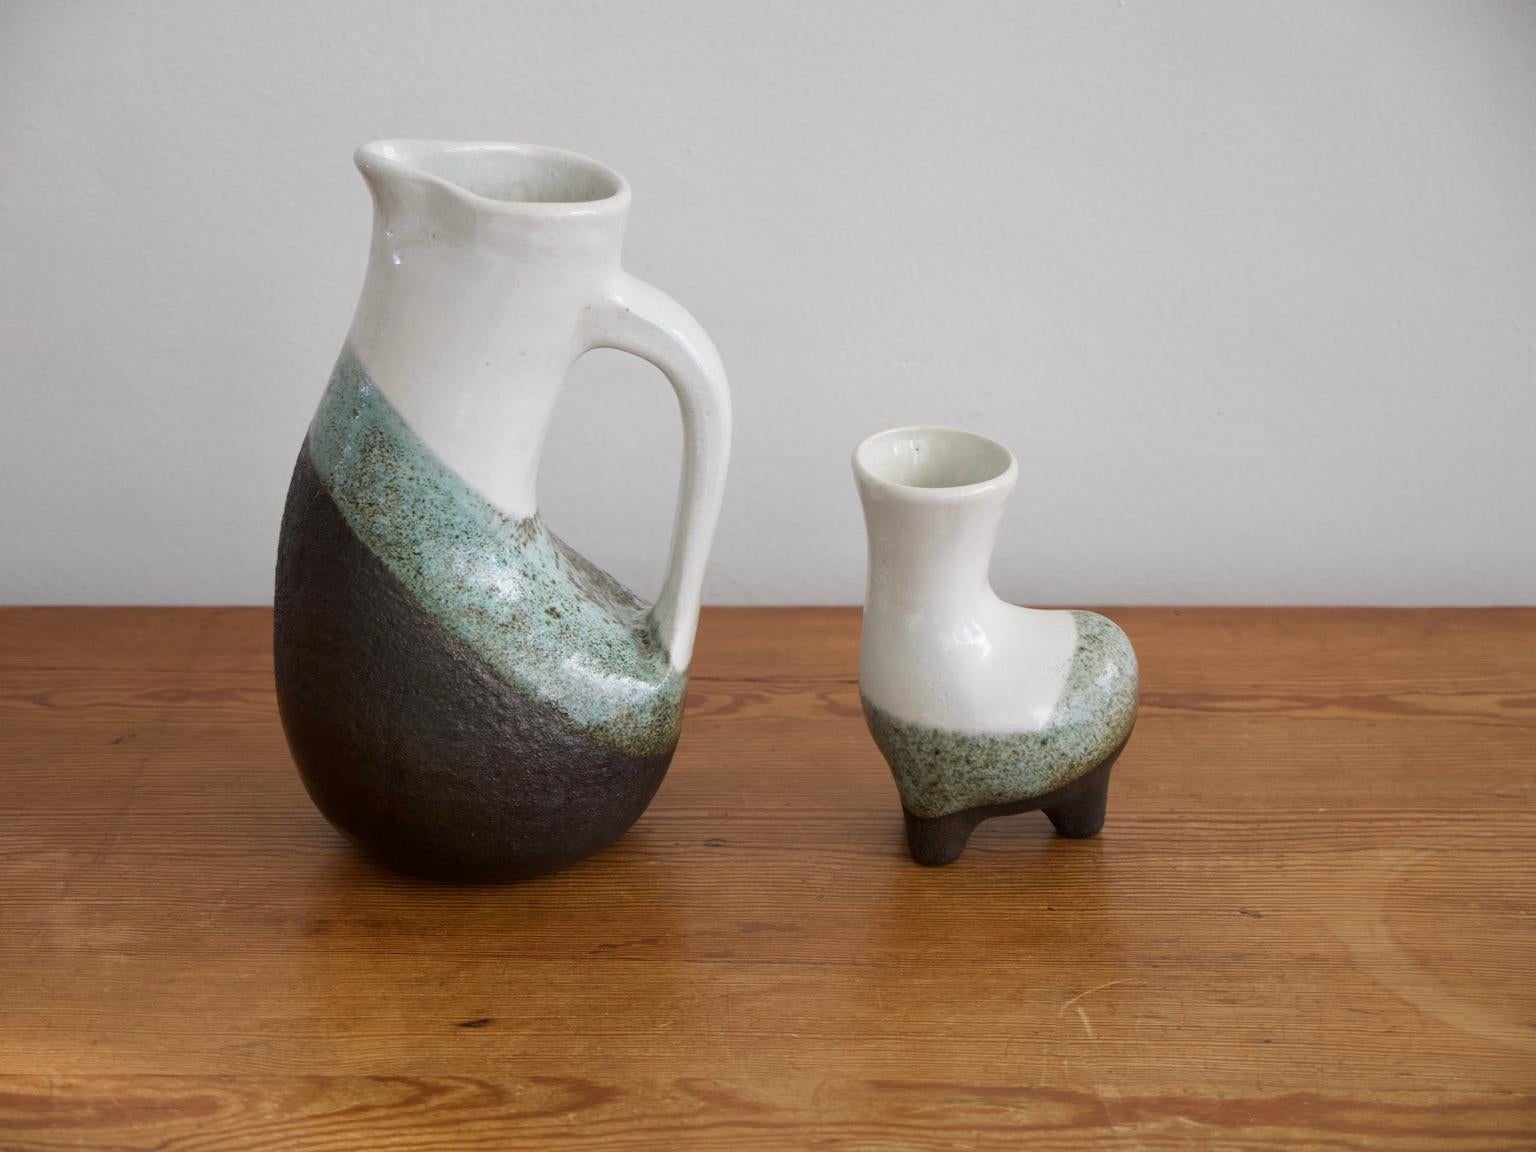 Large jug and a smaller vase of zoomorphic form made of enameled earthenware by a French ceramist, painter and sculptor Gilbert Valentin, (1928-2001).
Measures: Jug H 31.5 cm, W 17.5 cm, D 16.5 cm.
Vase H 17.3 cm, W 11.5 cm, D 8.5 cm.